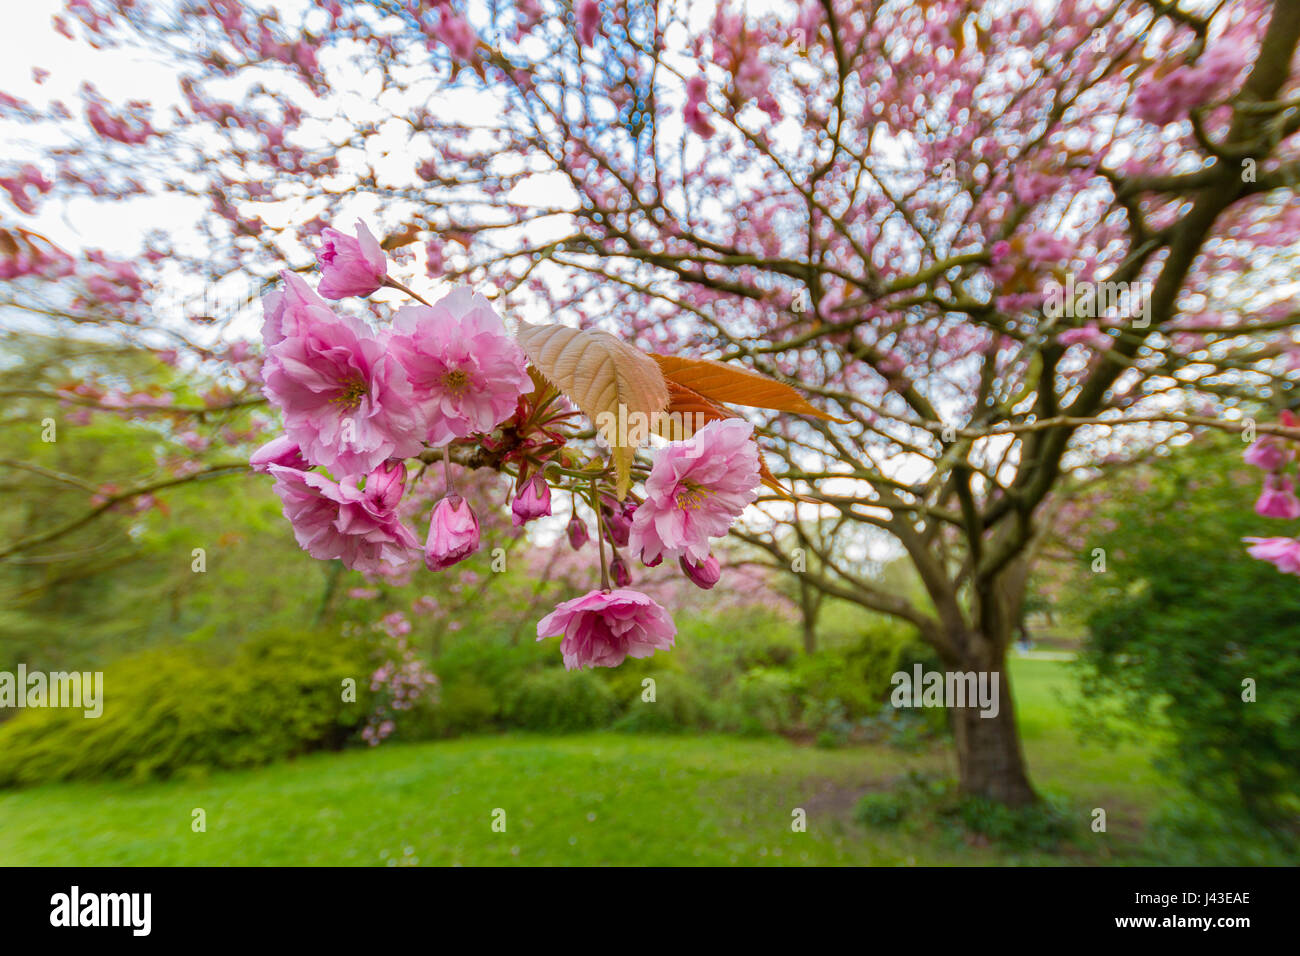 Close-up on the pink blossoms  and leaves of a prunus serrulata kwanzan cherry tree in Jesmond Dene park in Newcastle, UK shot on an April spring afte Stock Photo